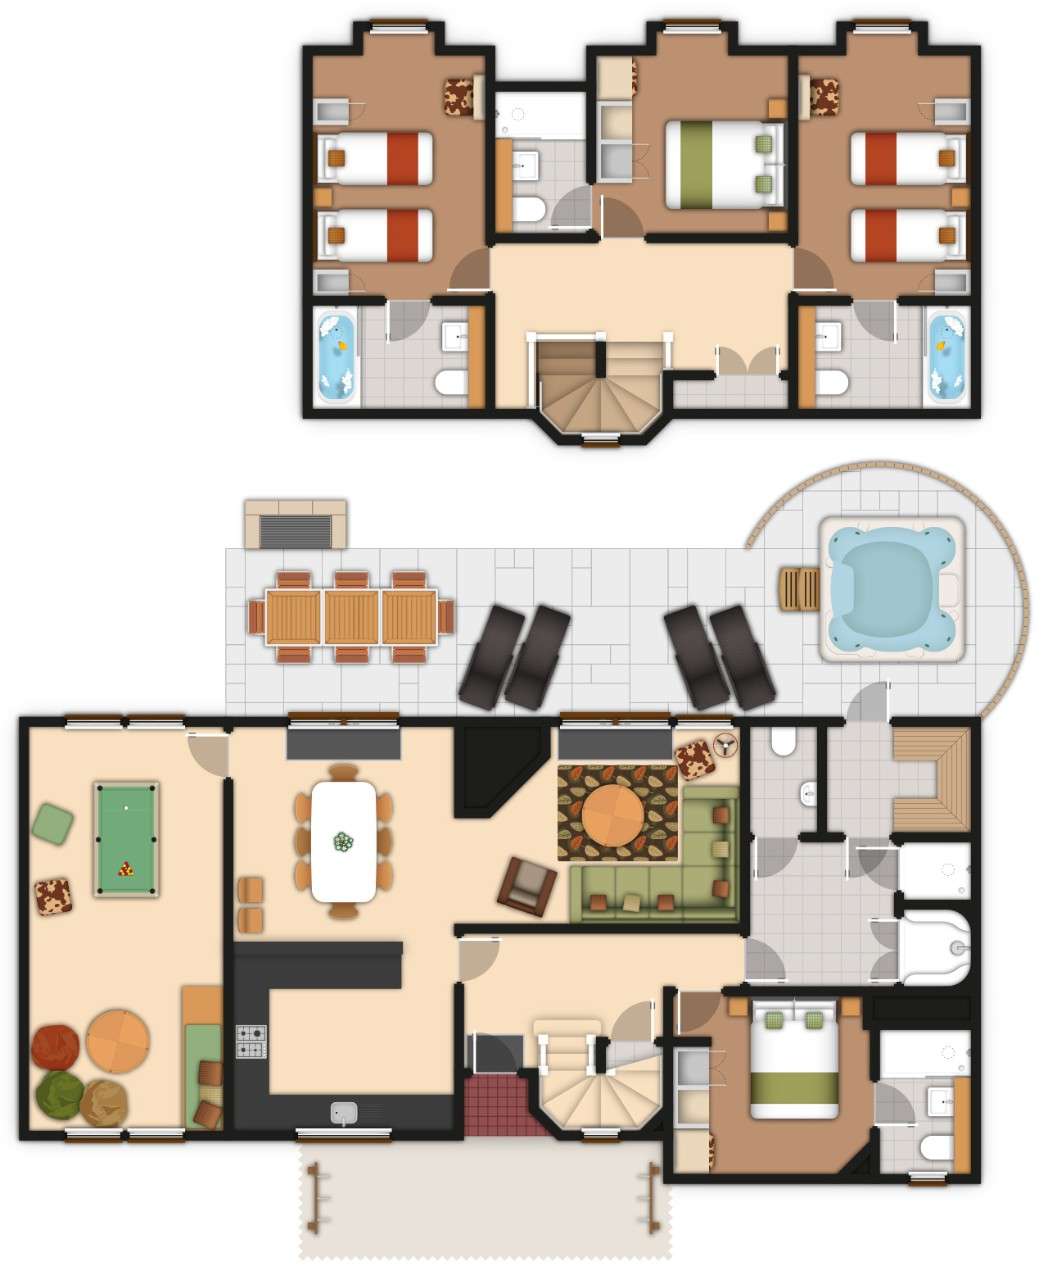 A detailed lodge floor plan illustration showing bedrooms, bathrooms, living area, kitchen, games room and outdoor space. If you require further assistance viewing the floor plan or need further information on the accommodation type please contact Guest Services.